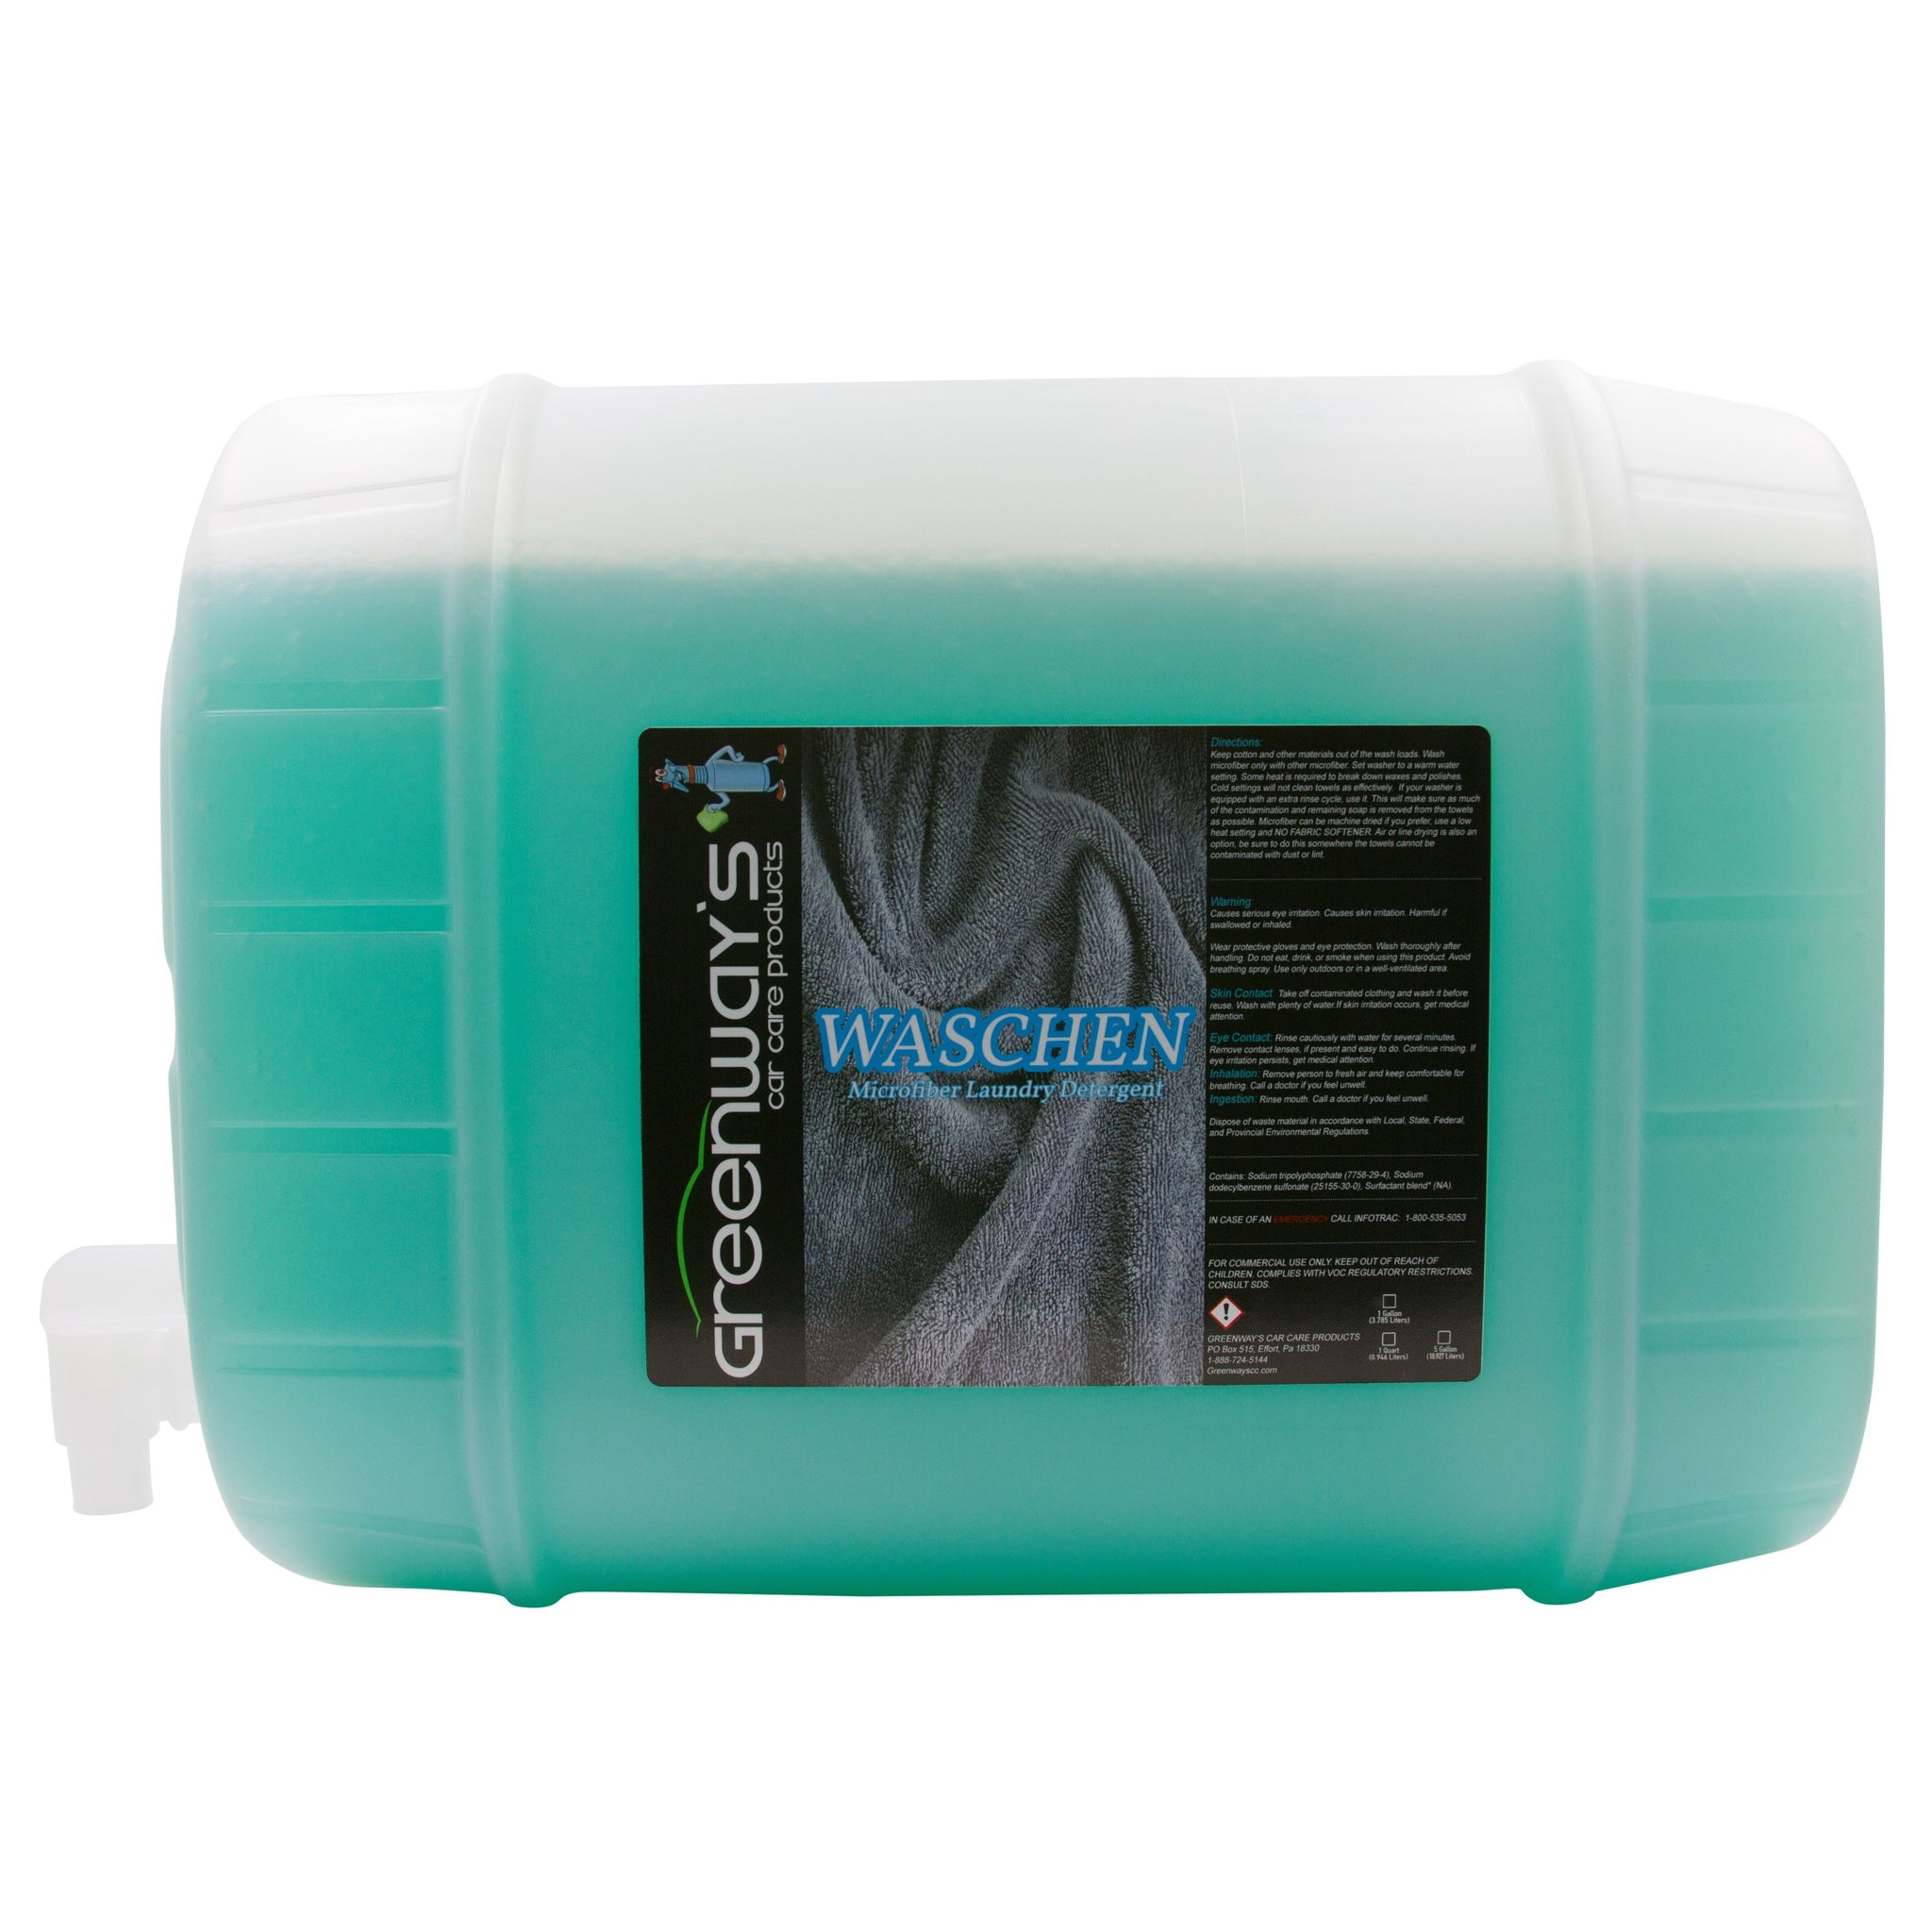 Greenway’s Waschen Microfiber Laundry Detergent, safe for all machines, biodegradable, optic brighteners, 5 gallons.  